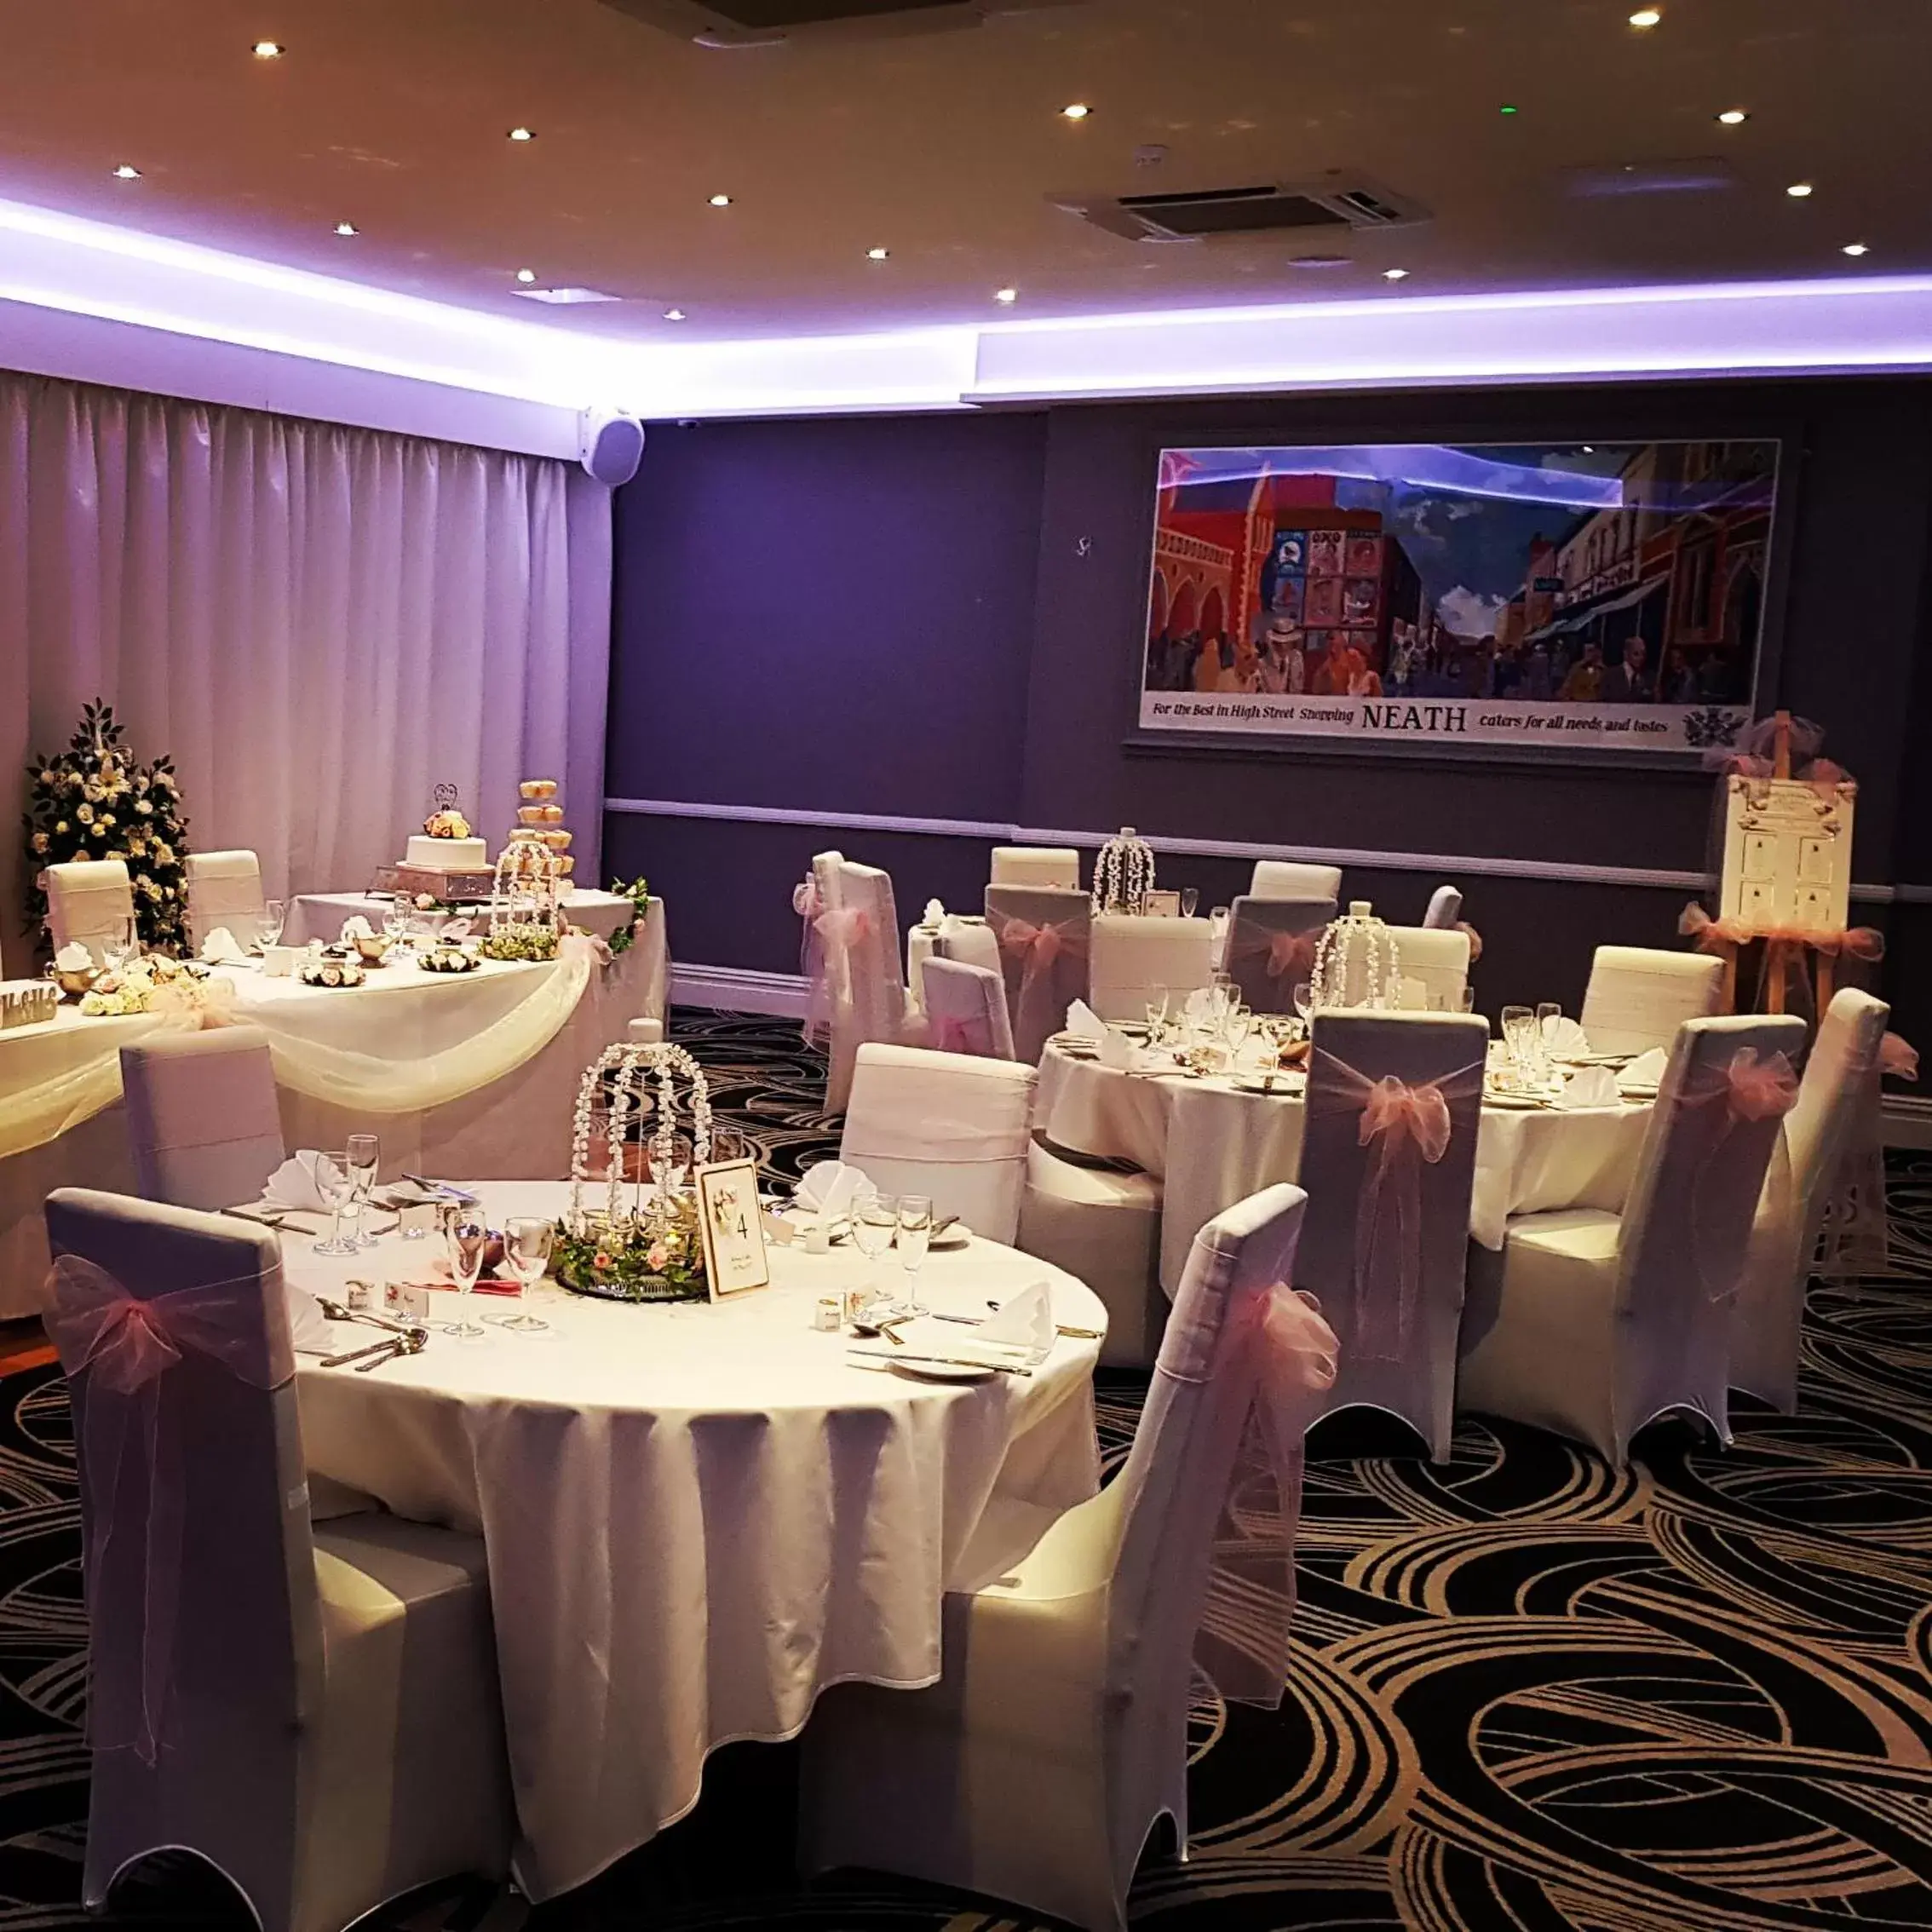 Banquet/Function facilities, Banquet Facilities in The Castle Hotel Neath